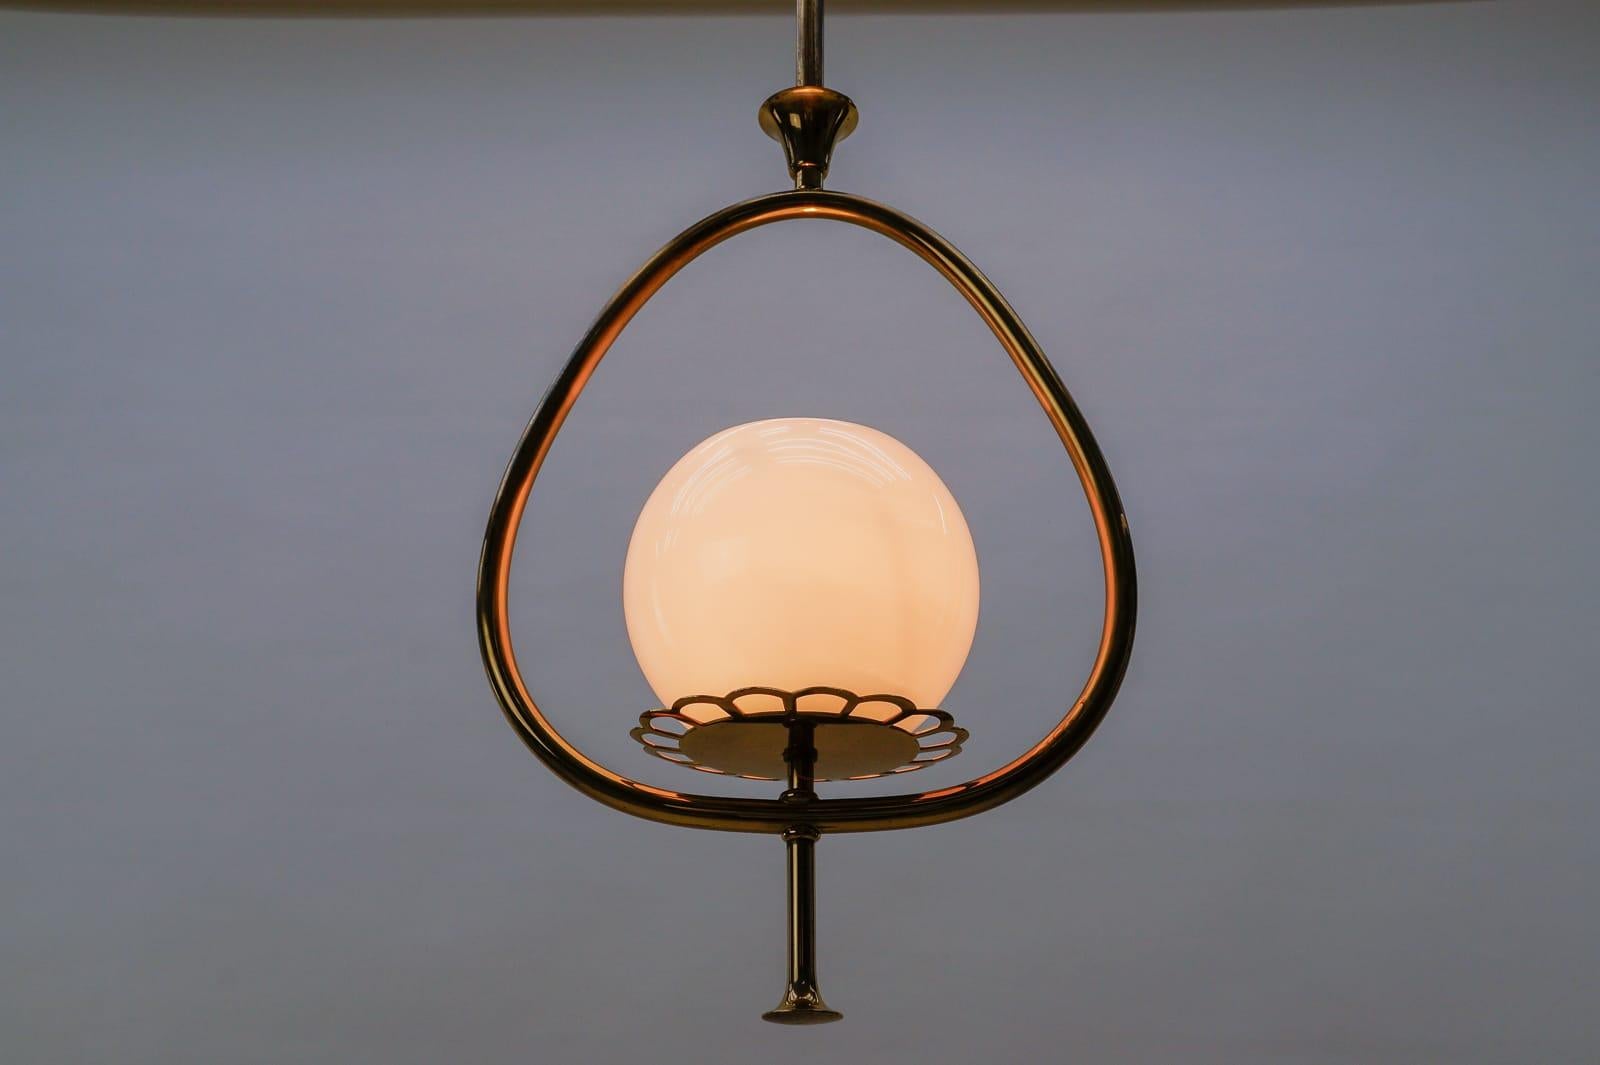 Metal Lovely Mid-Century Modern Brass and Opaline Glass Ceiling Lamp, 1950s, Austria